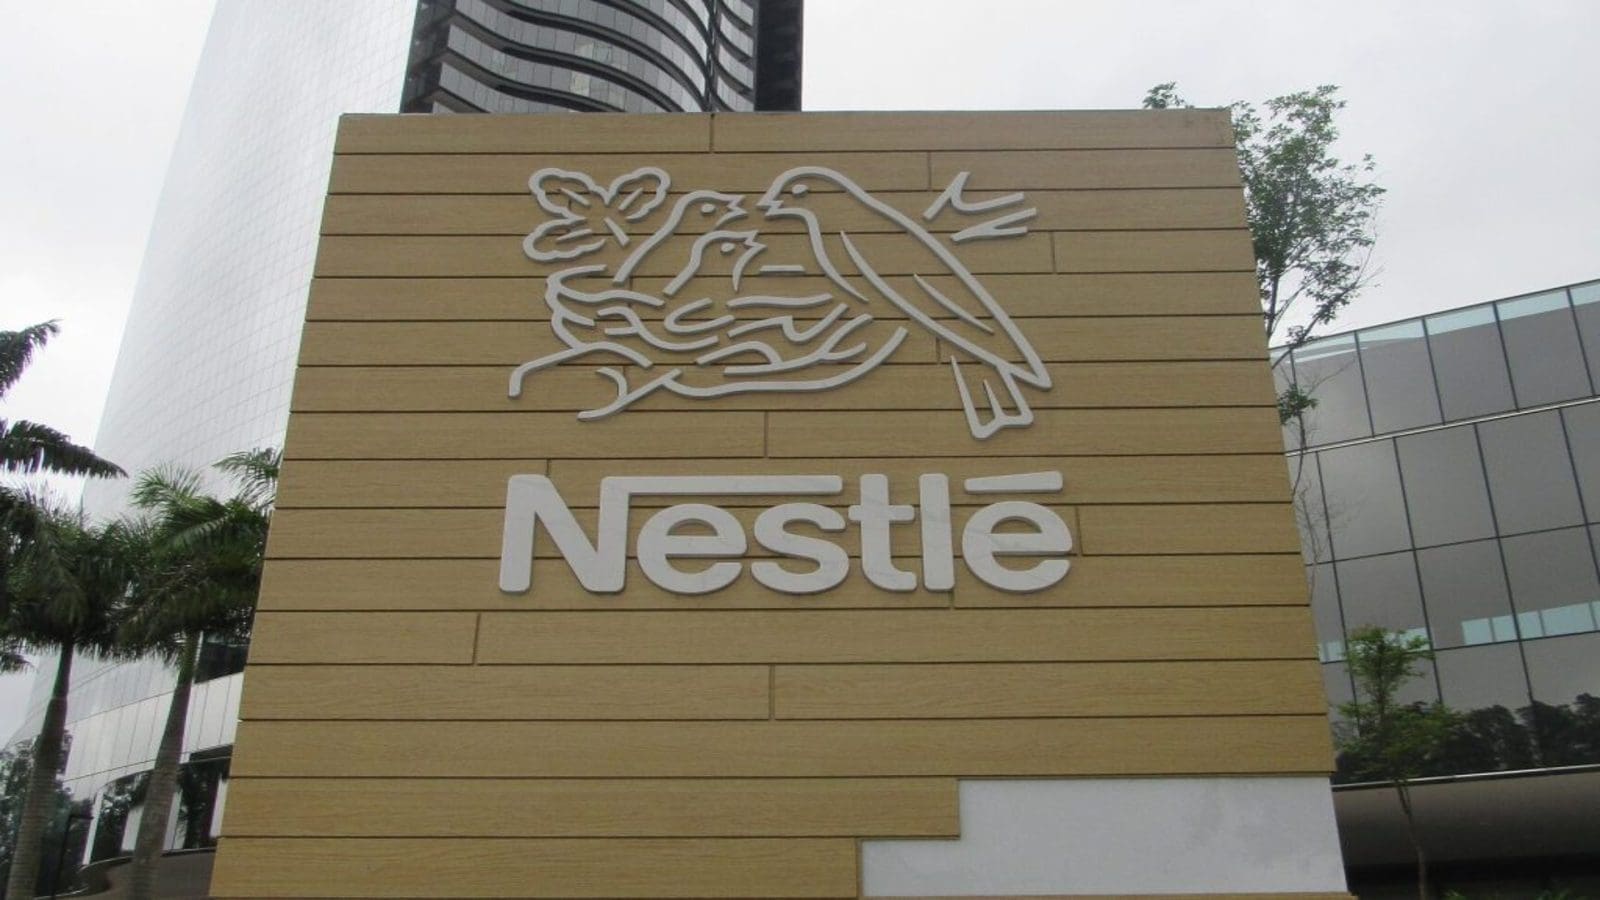 Nestlé to close Pizza factory in France linked to deadly E. coli outbreak